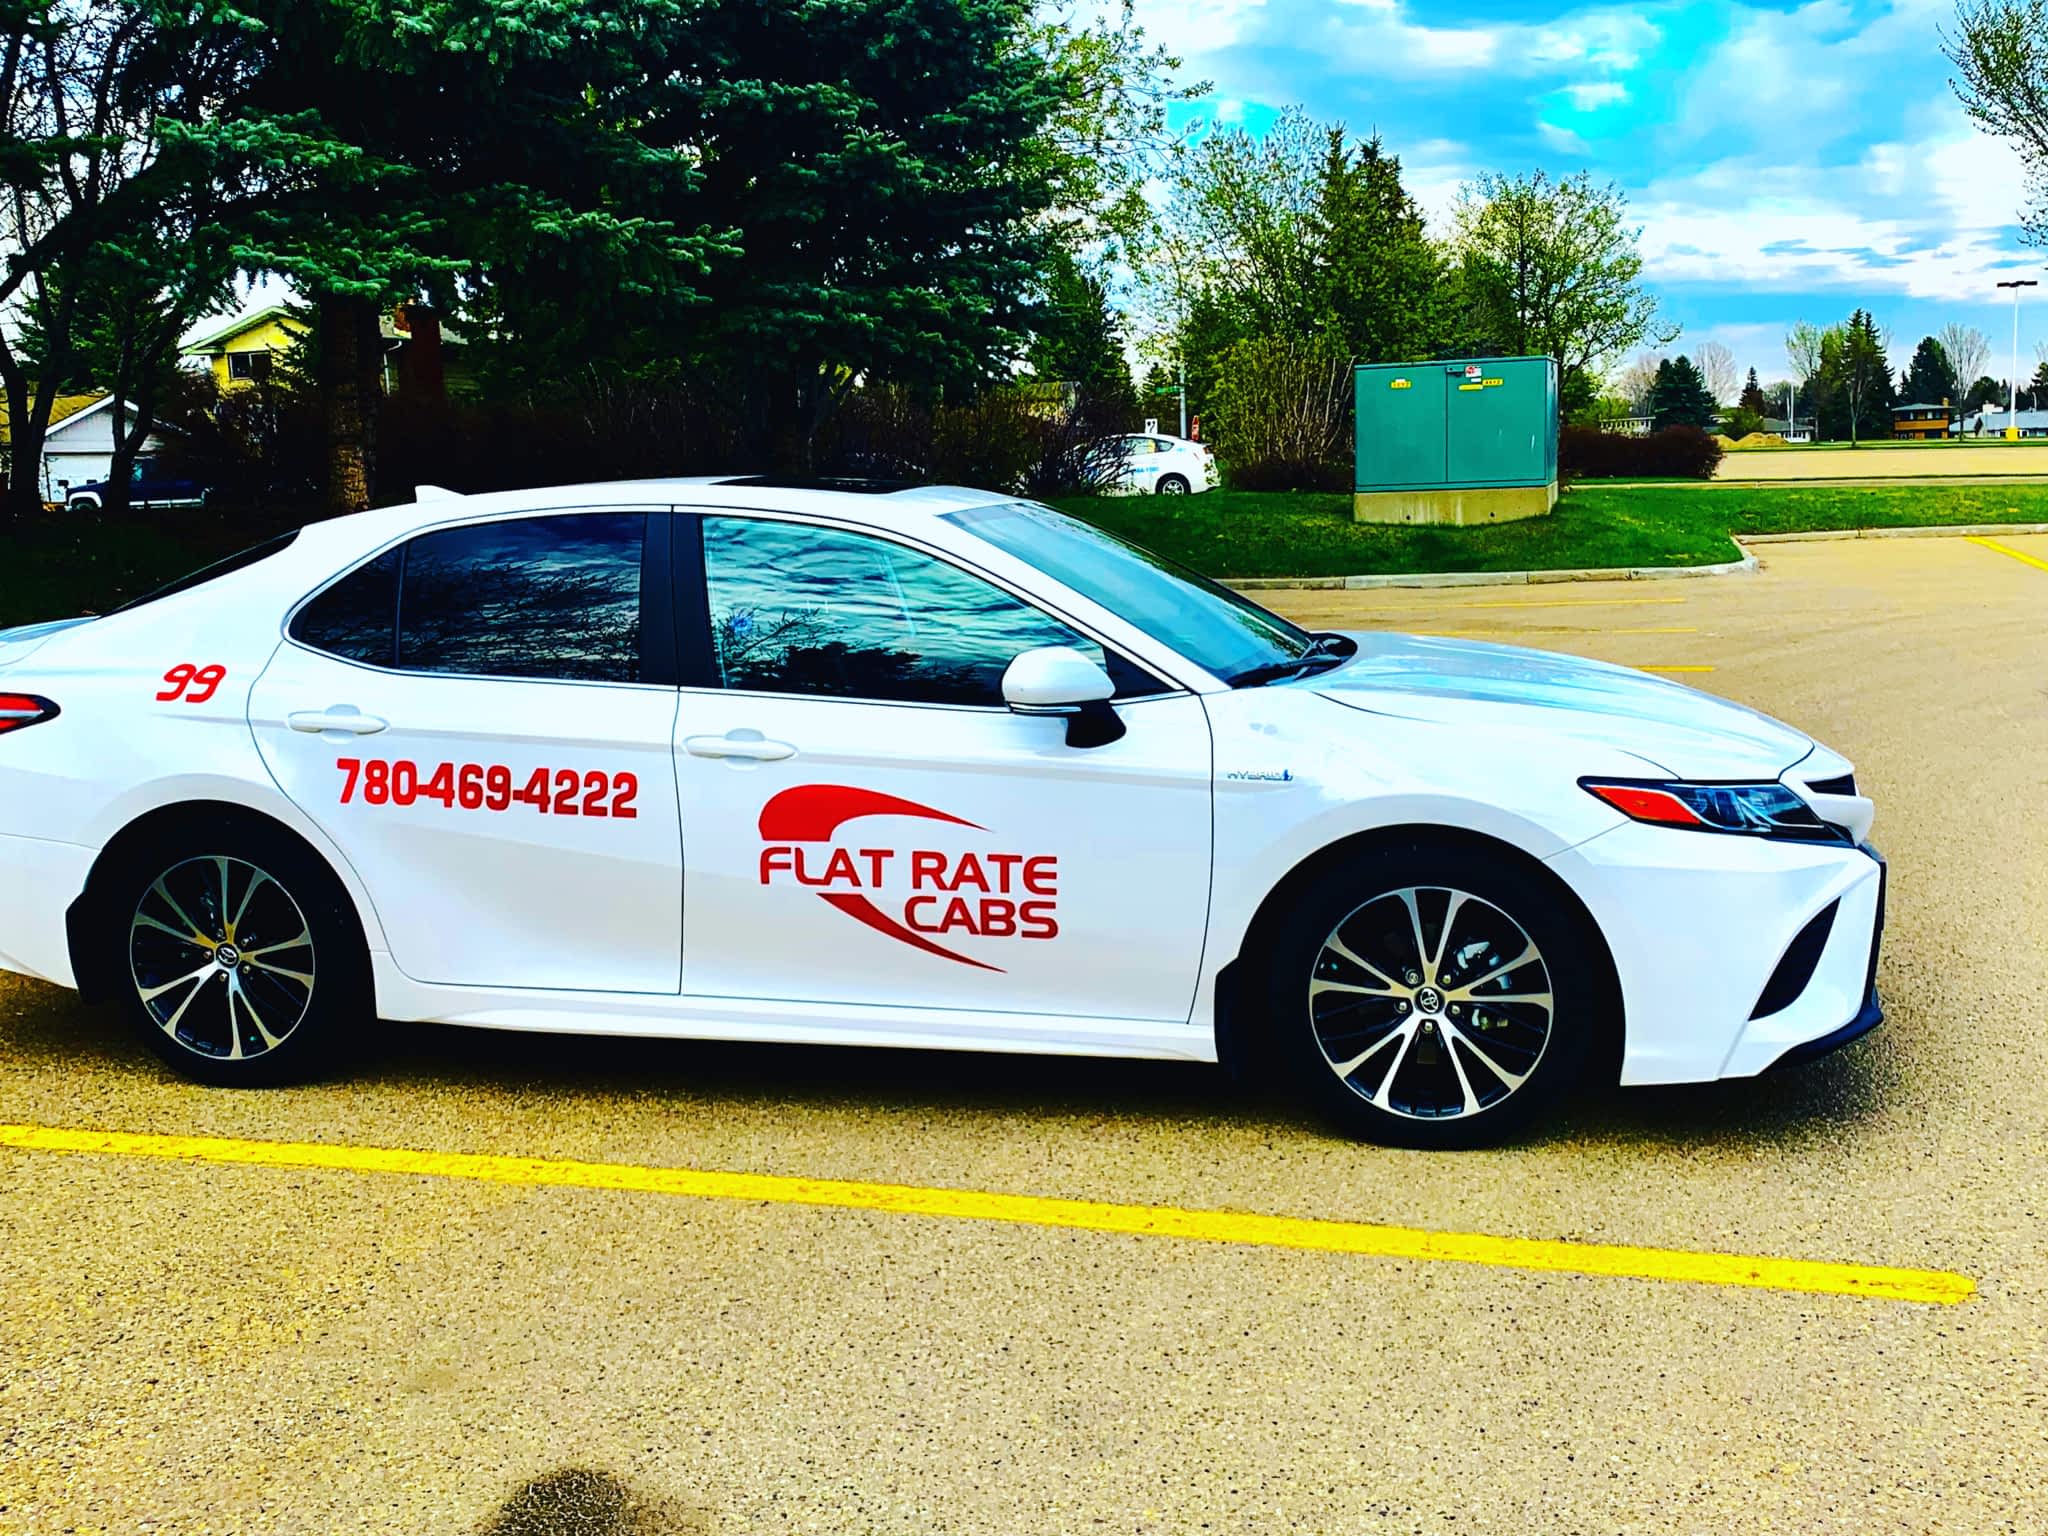 photo Sherwood Park Cabs - Flat Rate Cabs & Taxi